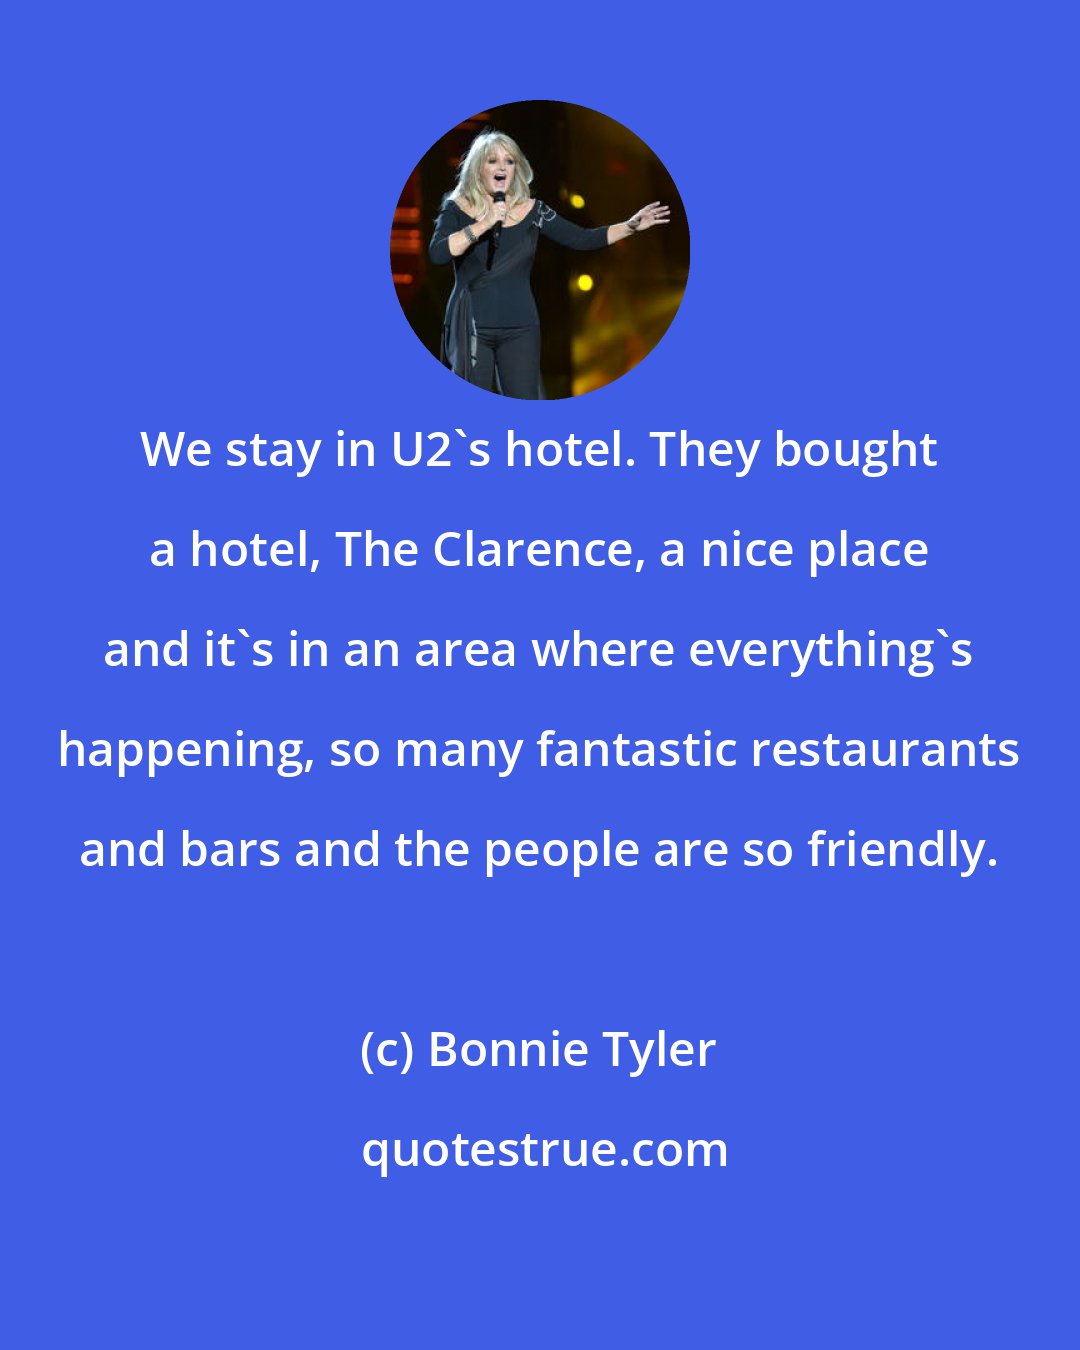 Bonnie Tyler: We stay in U2's hotel. They bought a hotel, The Clarence, a nice place and it's in an area where everything's happening, so many fantastic restaurants and bars and the people are so friendly.